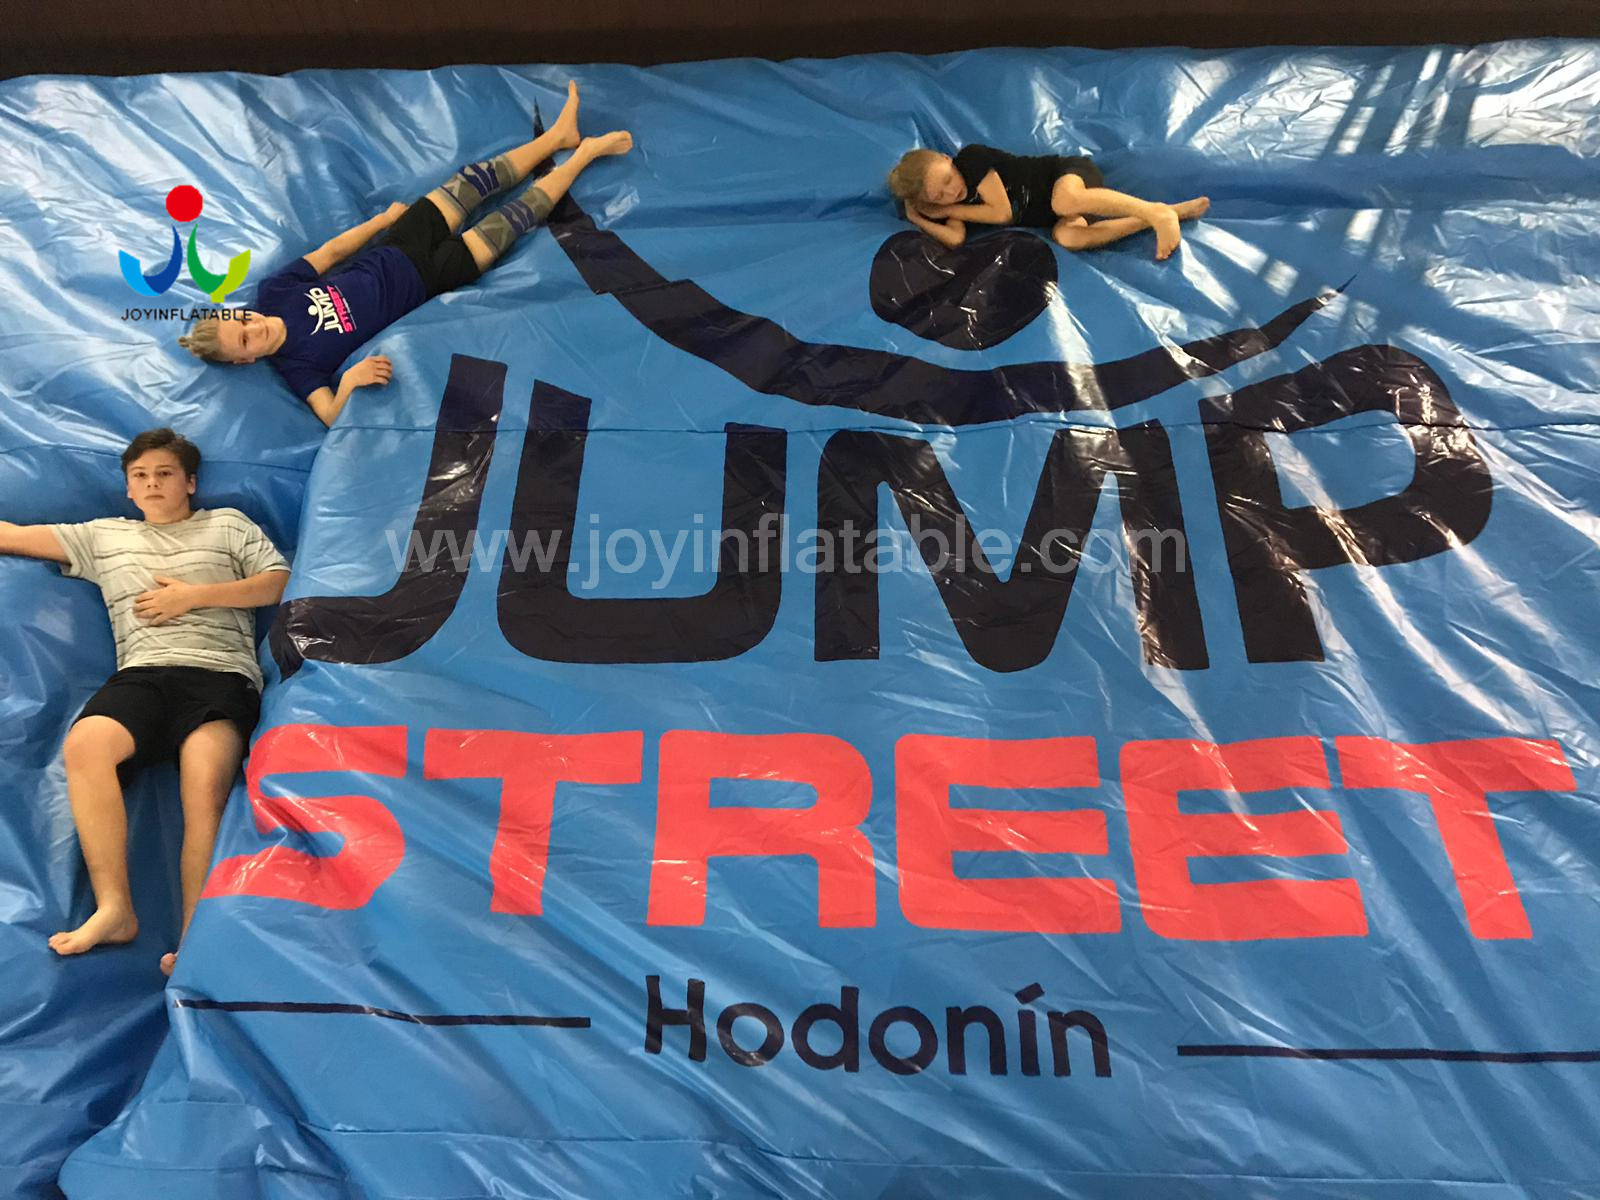 JOY Inflatable High-quality trampoline airbag cost for high jump training-2